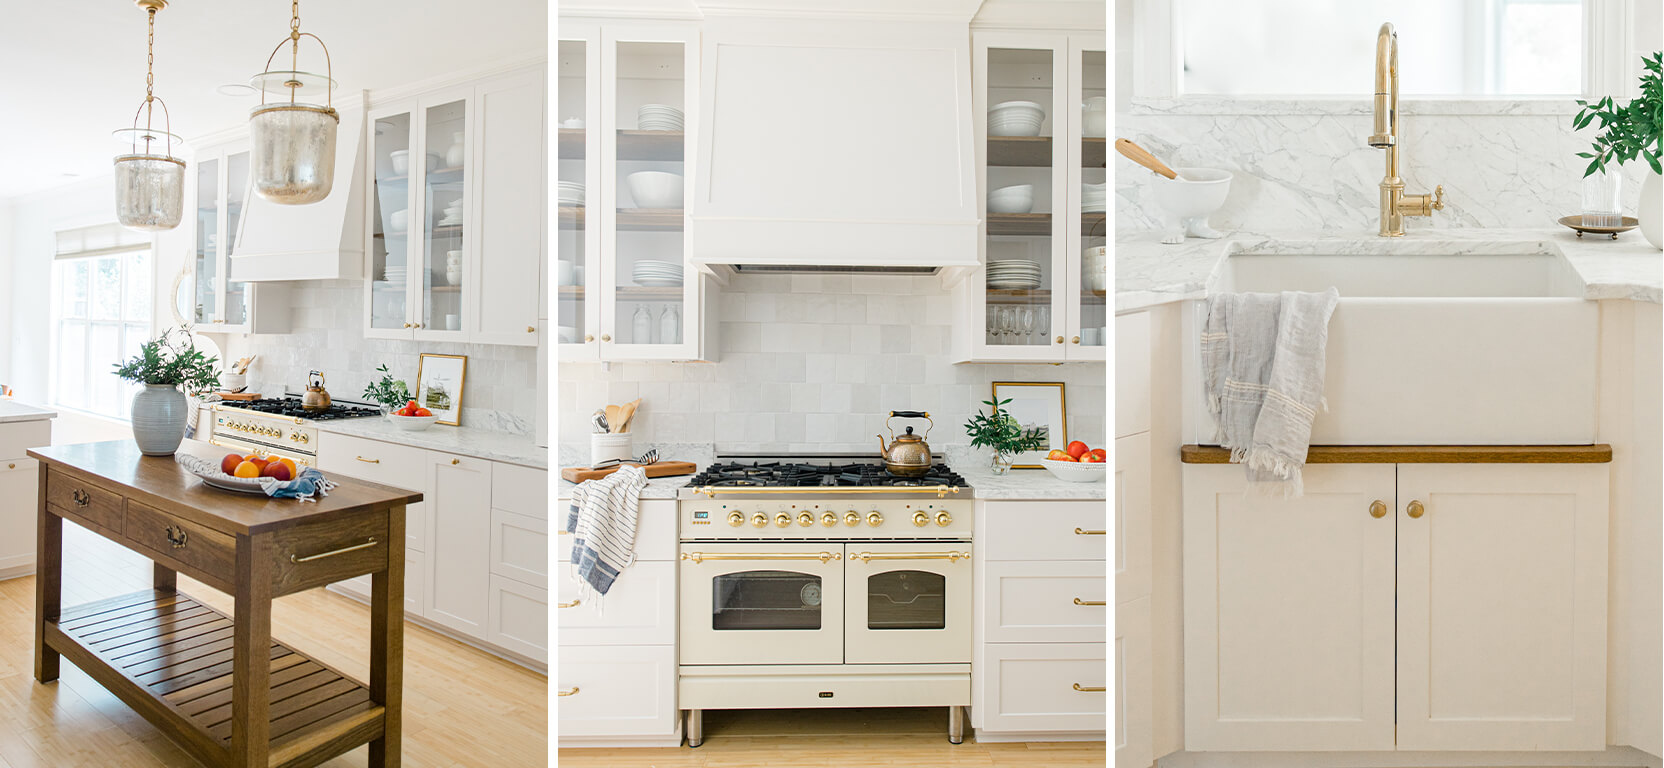 Left image: Warm white kitchen with natural wood island and European-inspired cabinetry and appliances. Center image: Shot of warm white oven and gas range with copper tea kettle, flanked by glass-front ceiling-height cabinets. Right image: White farmhouse sink and marble backsplash with brassy metallic faucet and cupboard door pulls.